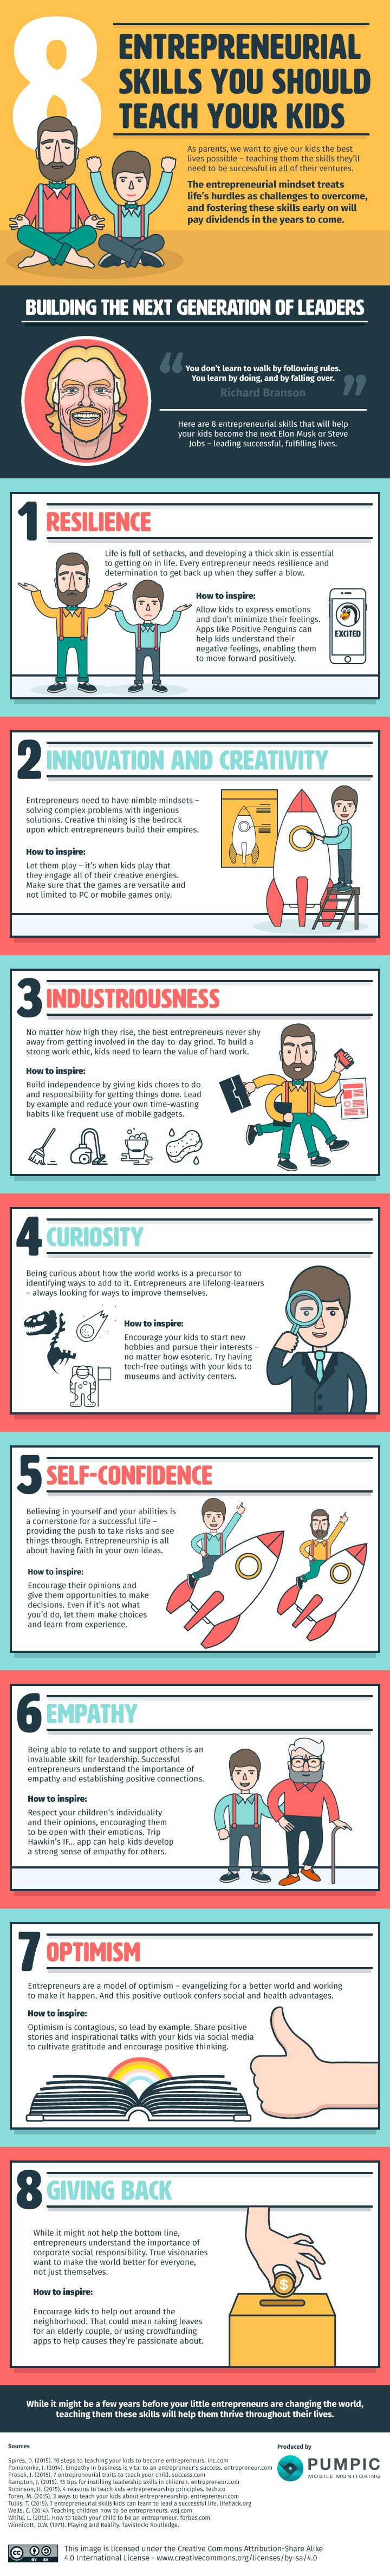 8 Entrepreneurial Skills You Should Teach Your Kids (Infographic)